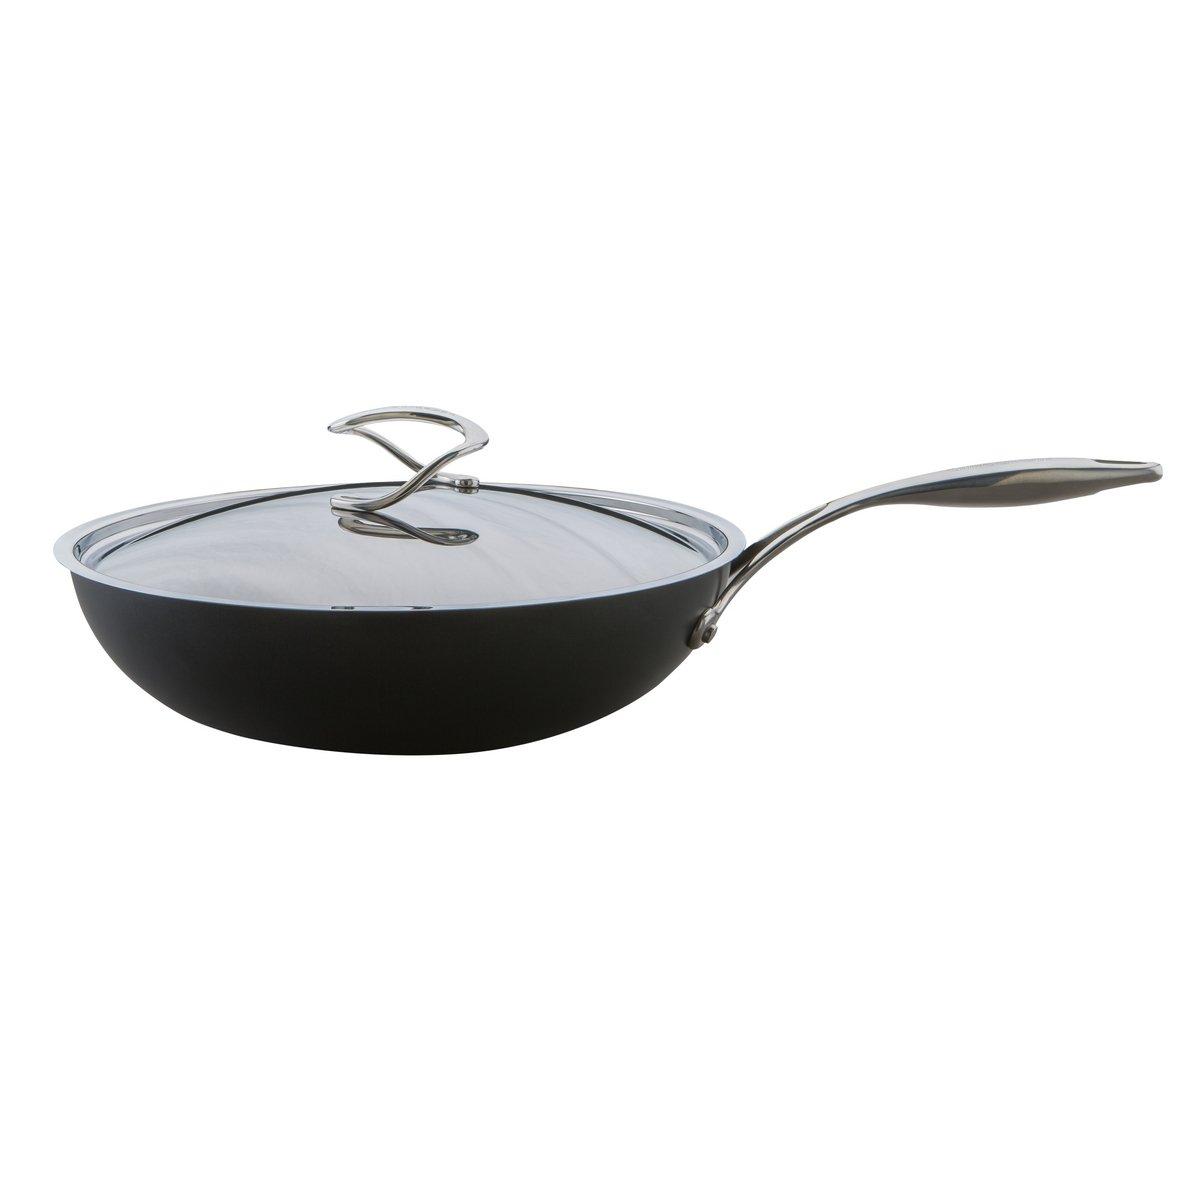 Style Wok Pan with Lid - Induction, Non Stick & Dishwasher Safe - 30 cm